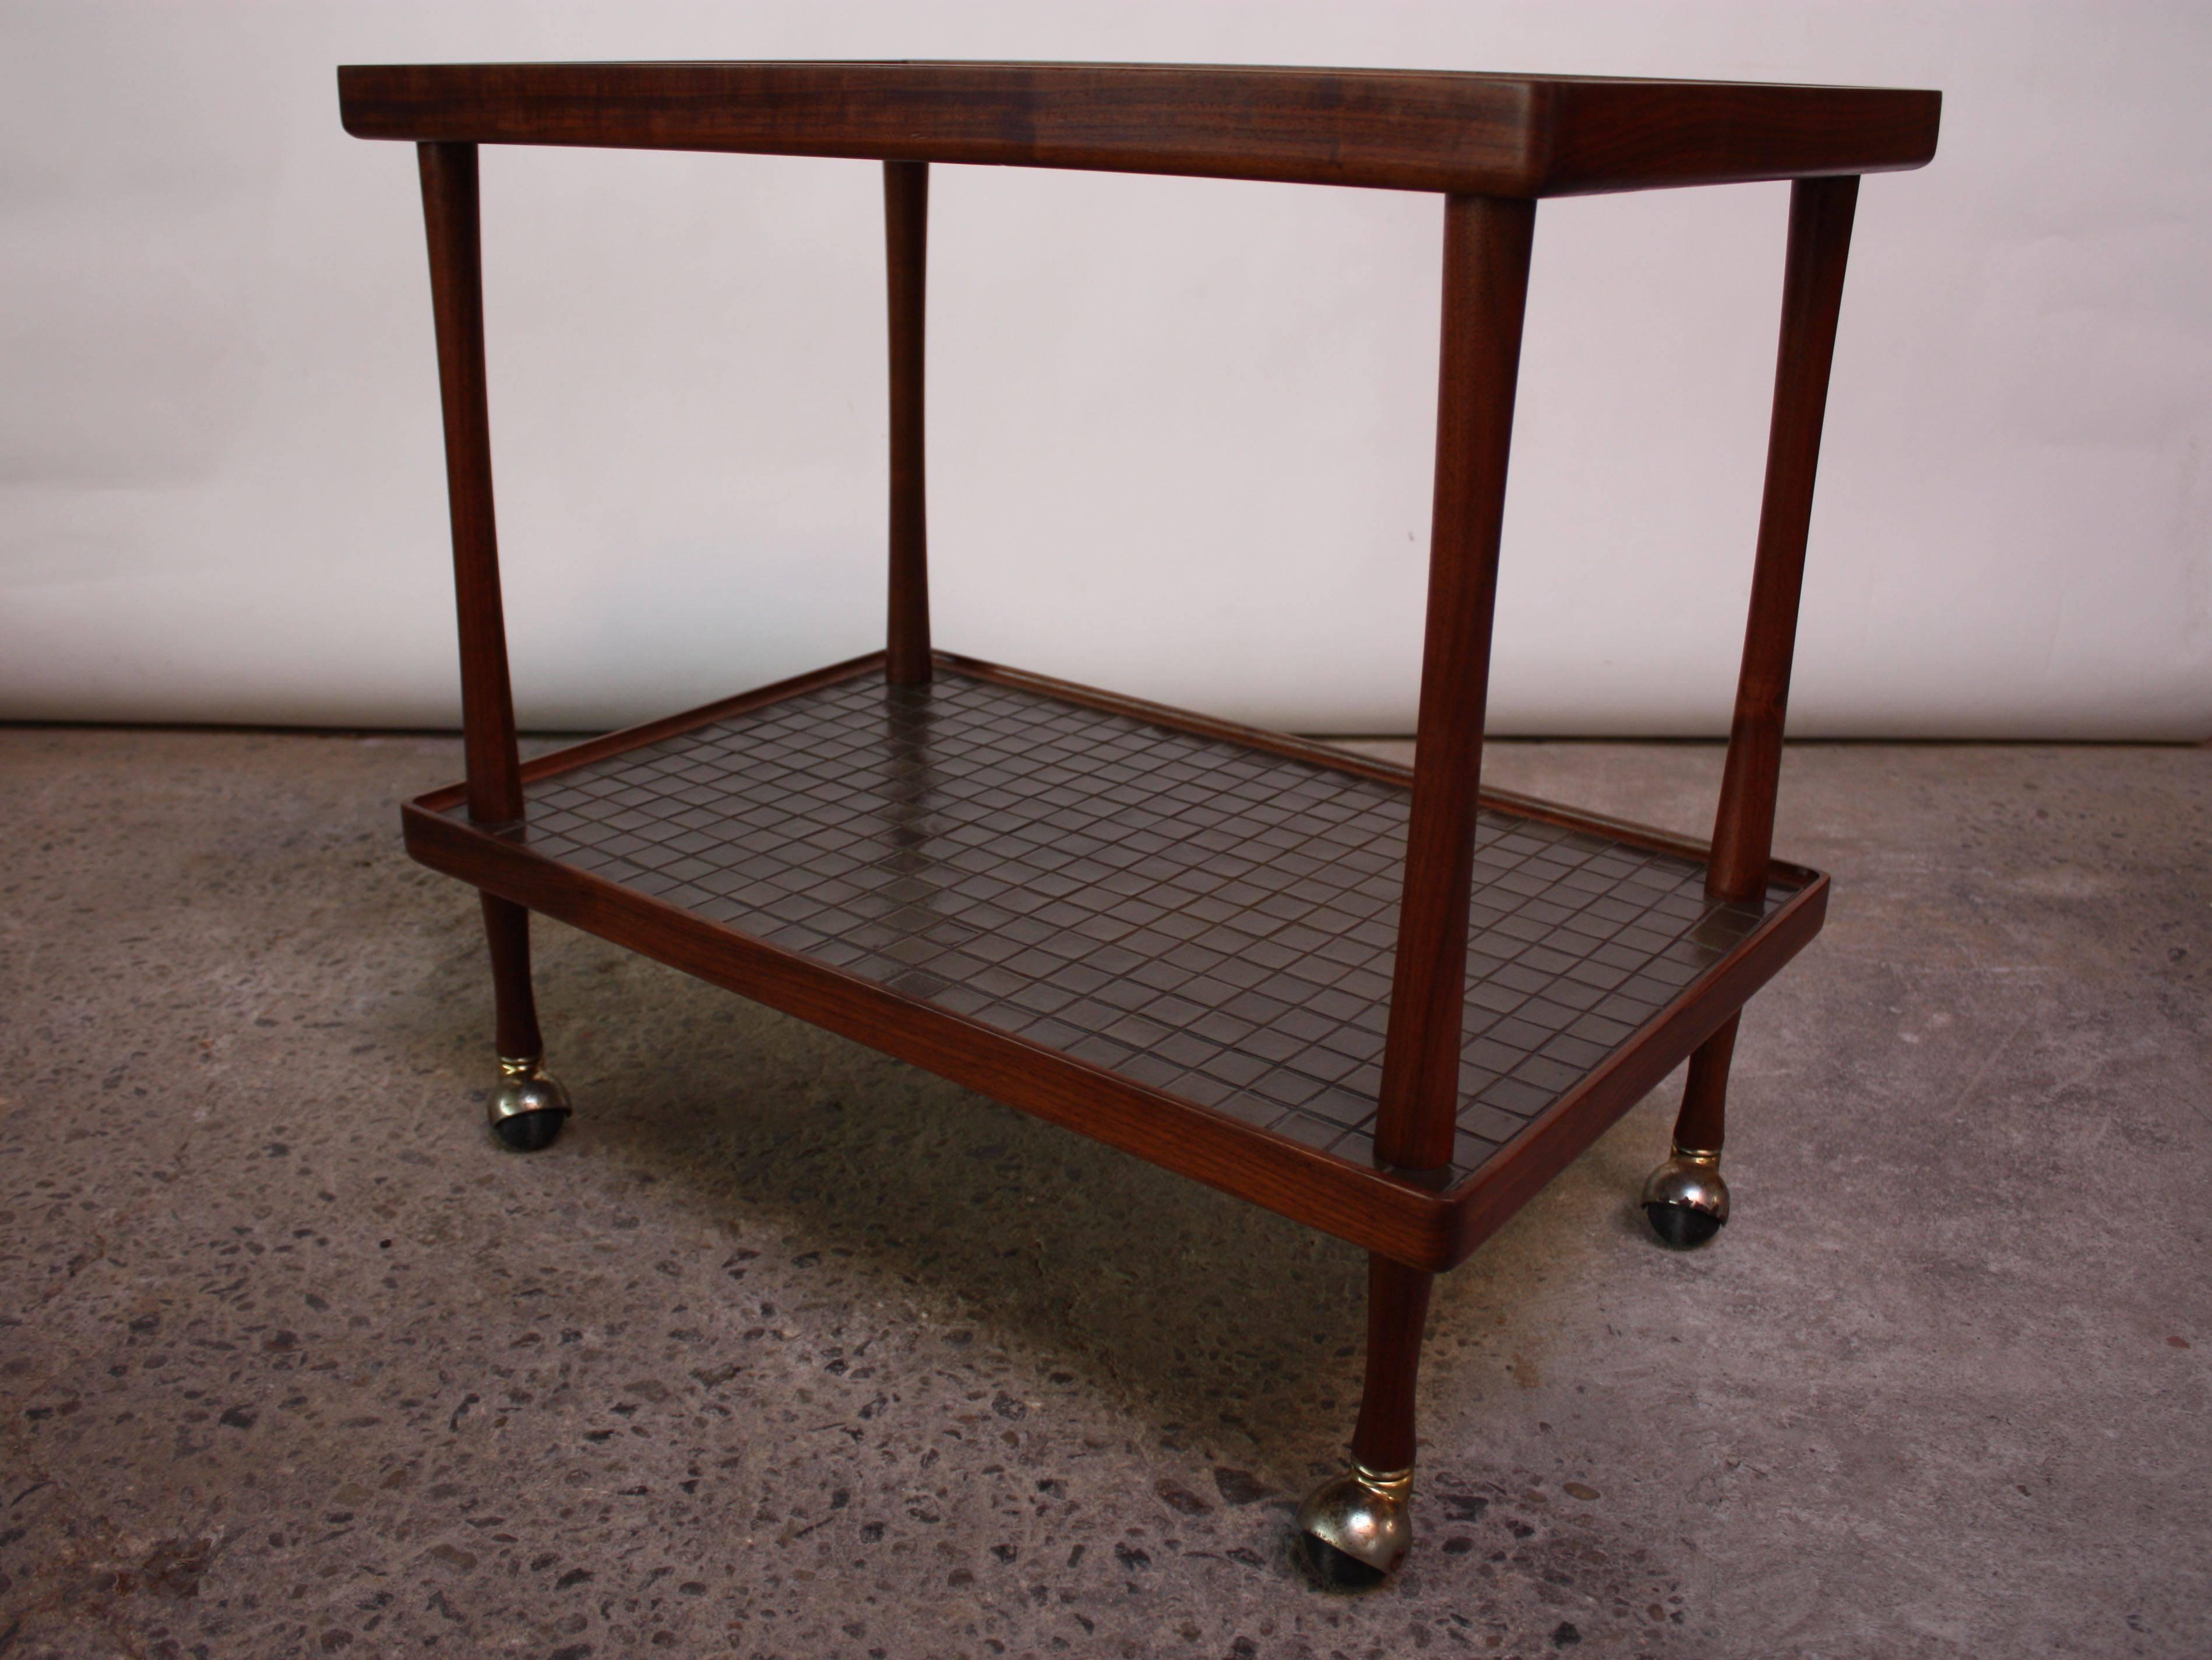 Two-Tiered Martz Ceramic Tile and Walnut Teacart 3